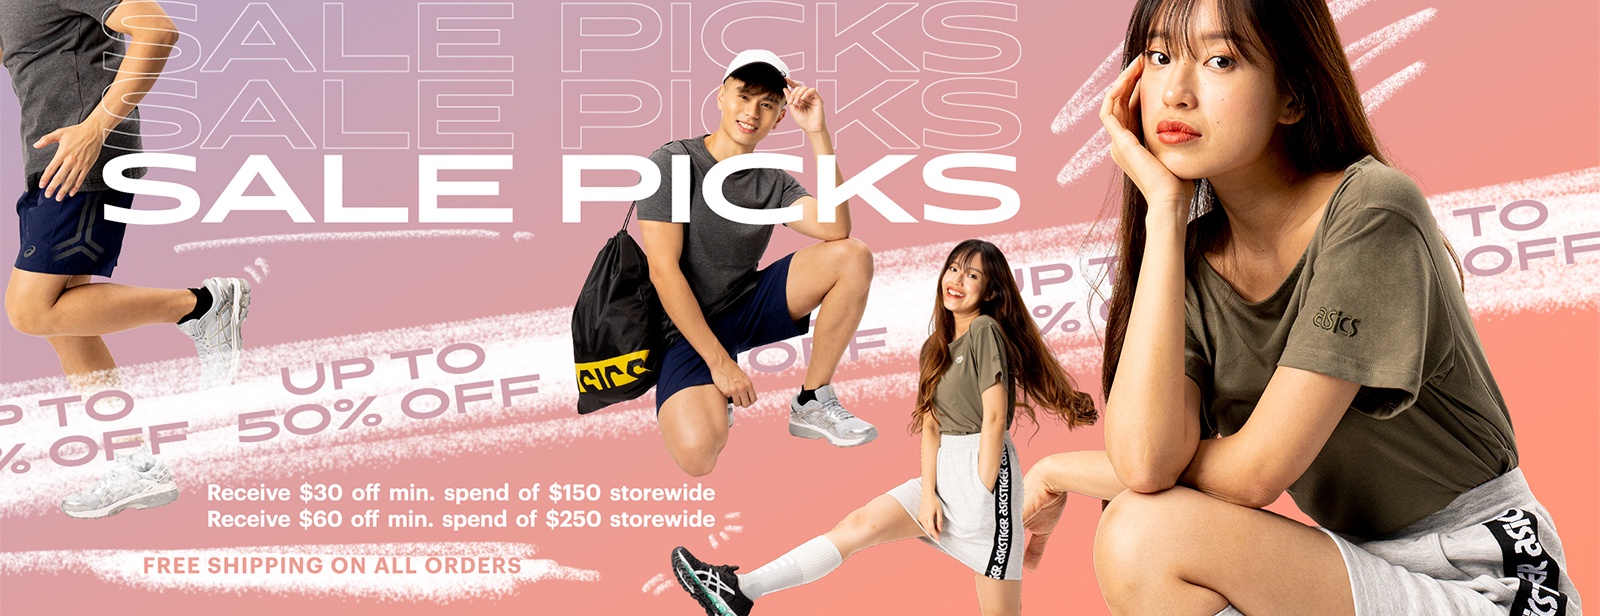 tread yarn gown Sale Picks Up to 50% Off | ASICS Singapore Official